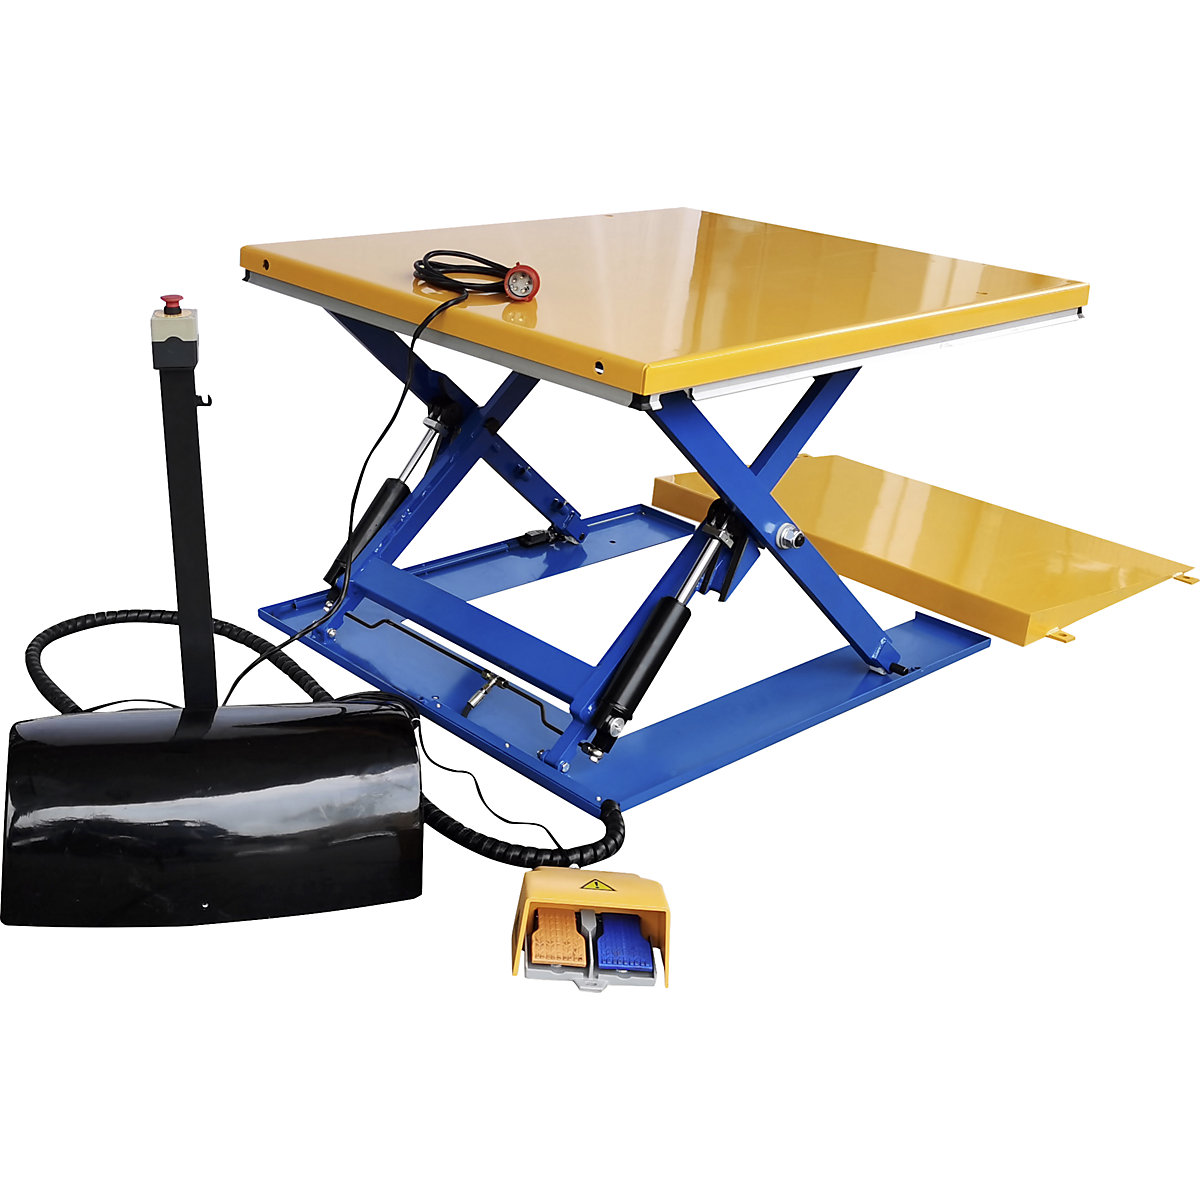 Low profile lift table – eurokraft basic, G shaped, max. load 1200 kg, foot operated control unit